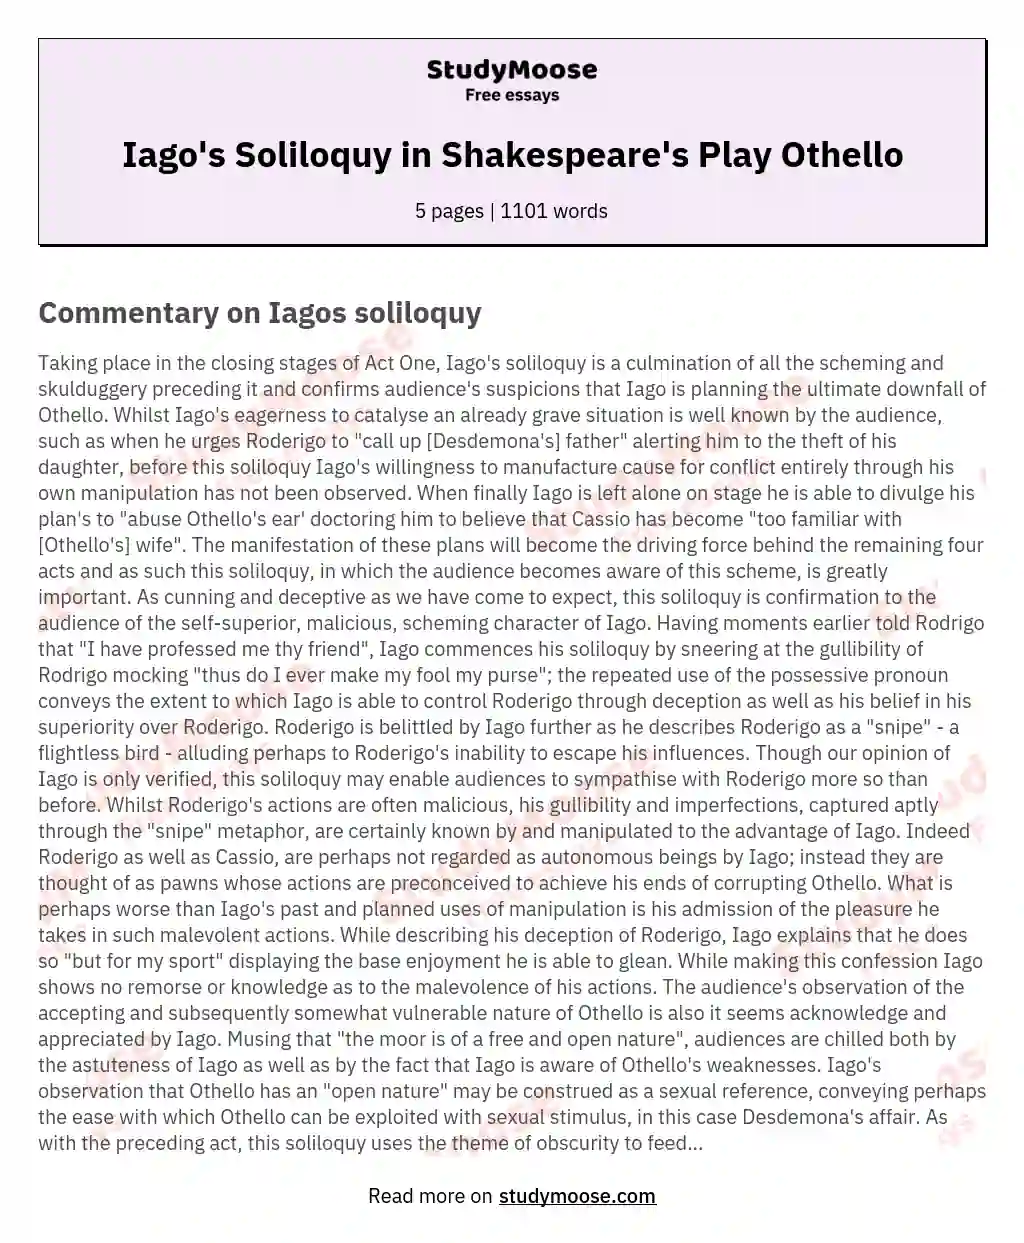 Iago's Soliloquy in Shakespeare's Play Othello essay